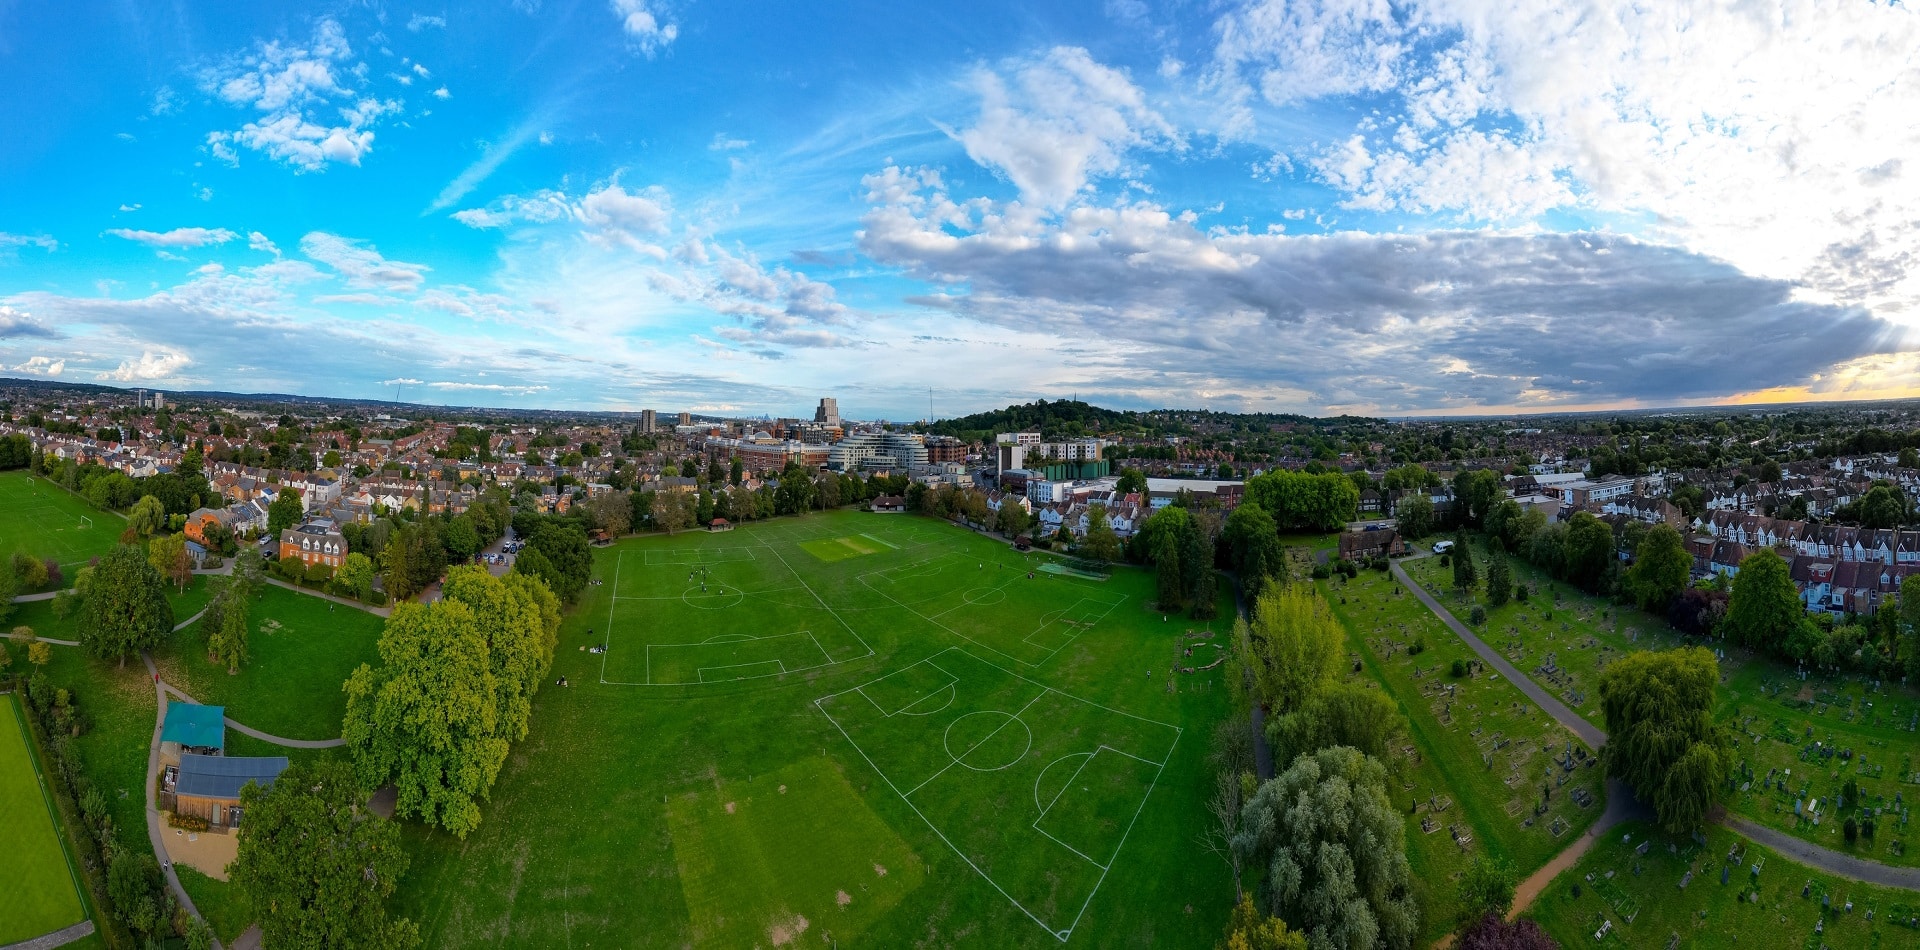 Panoramic view of the green football field and blue cloudy sky Harrow, Greater London, England